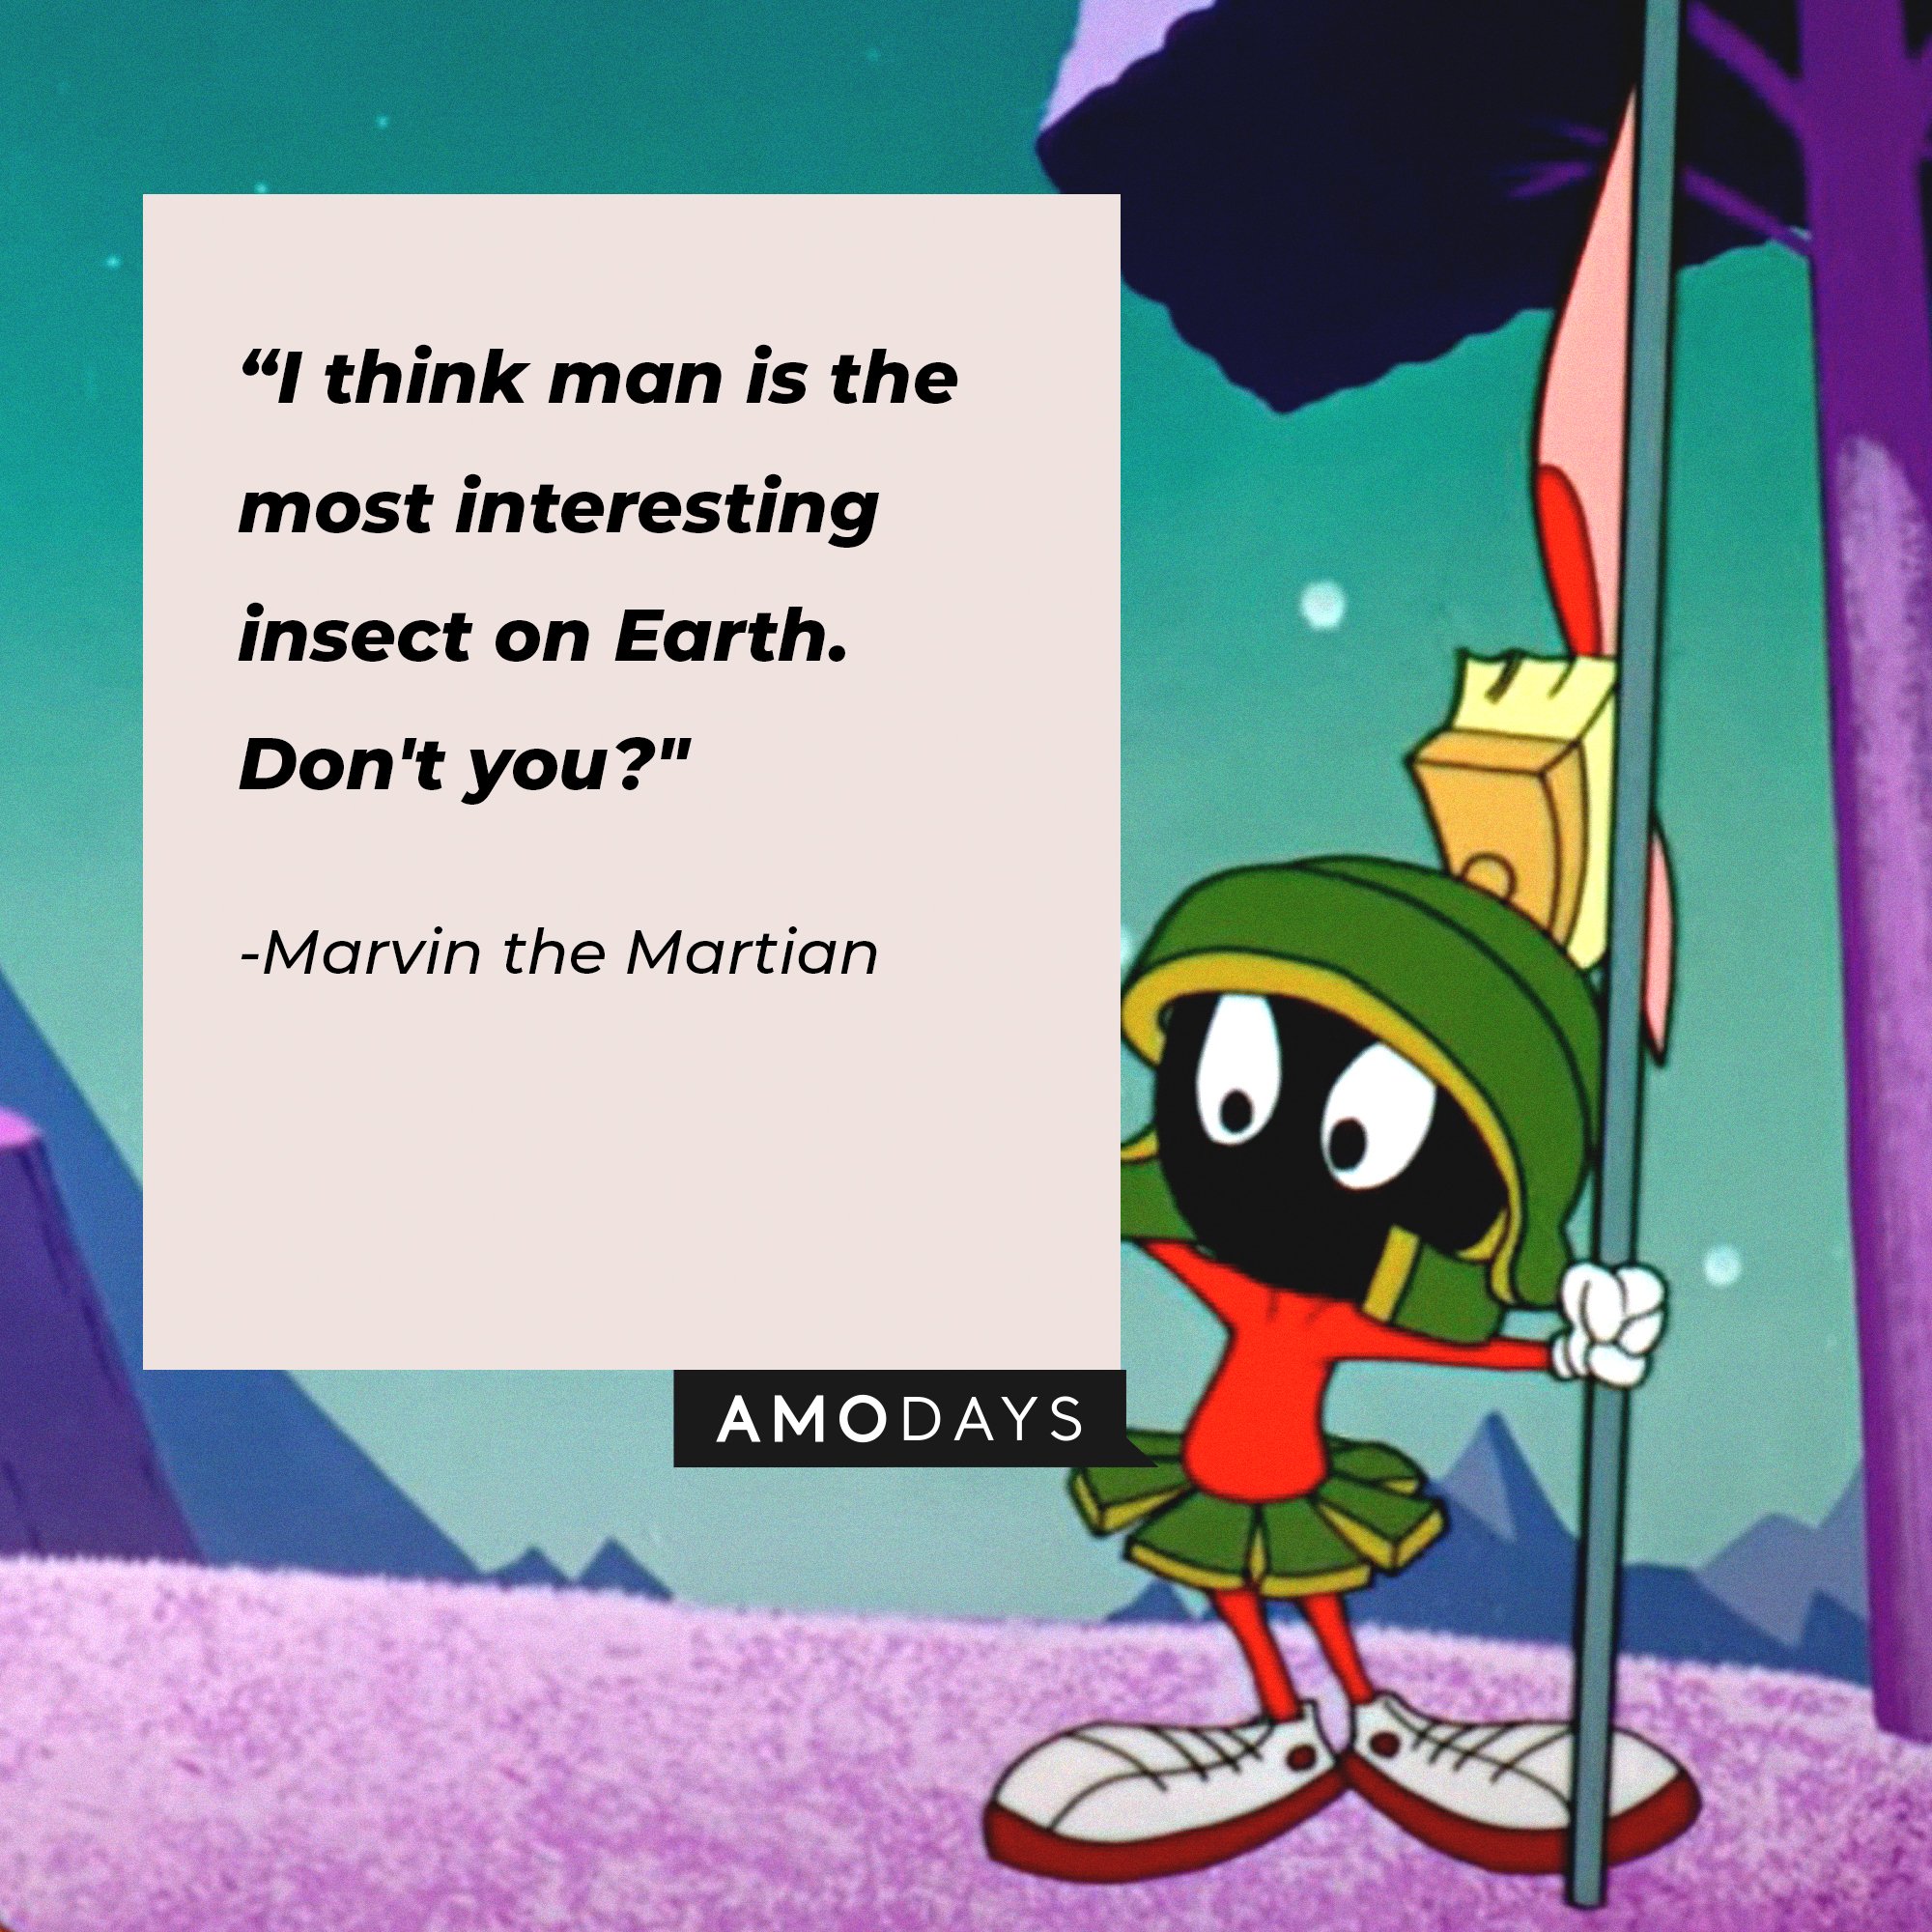  Marvin the Martian’s quote: "I think man is the most interesting insect on Earth. Don’t you?” | Image: AmoDays